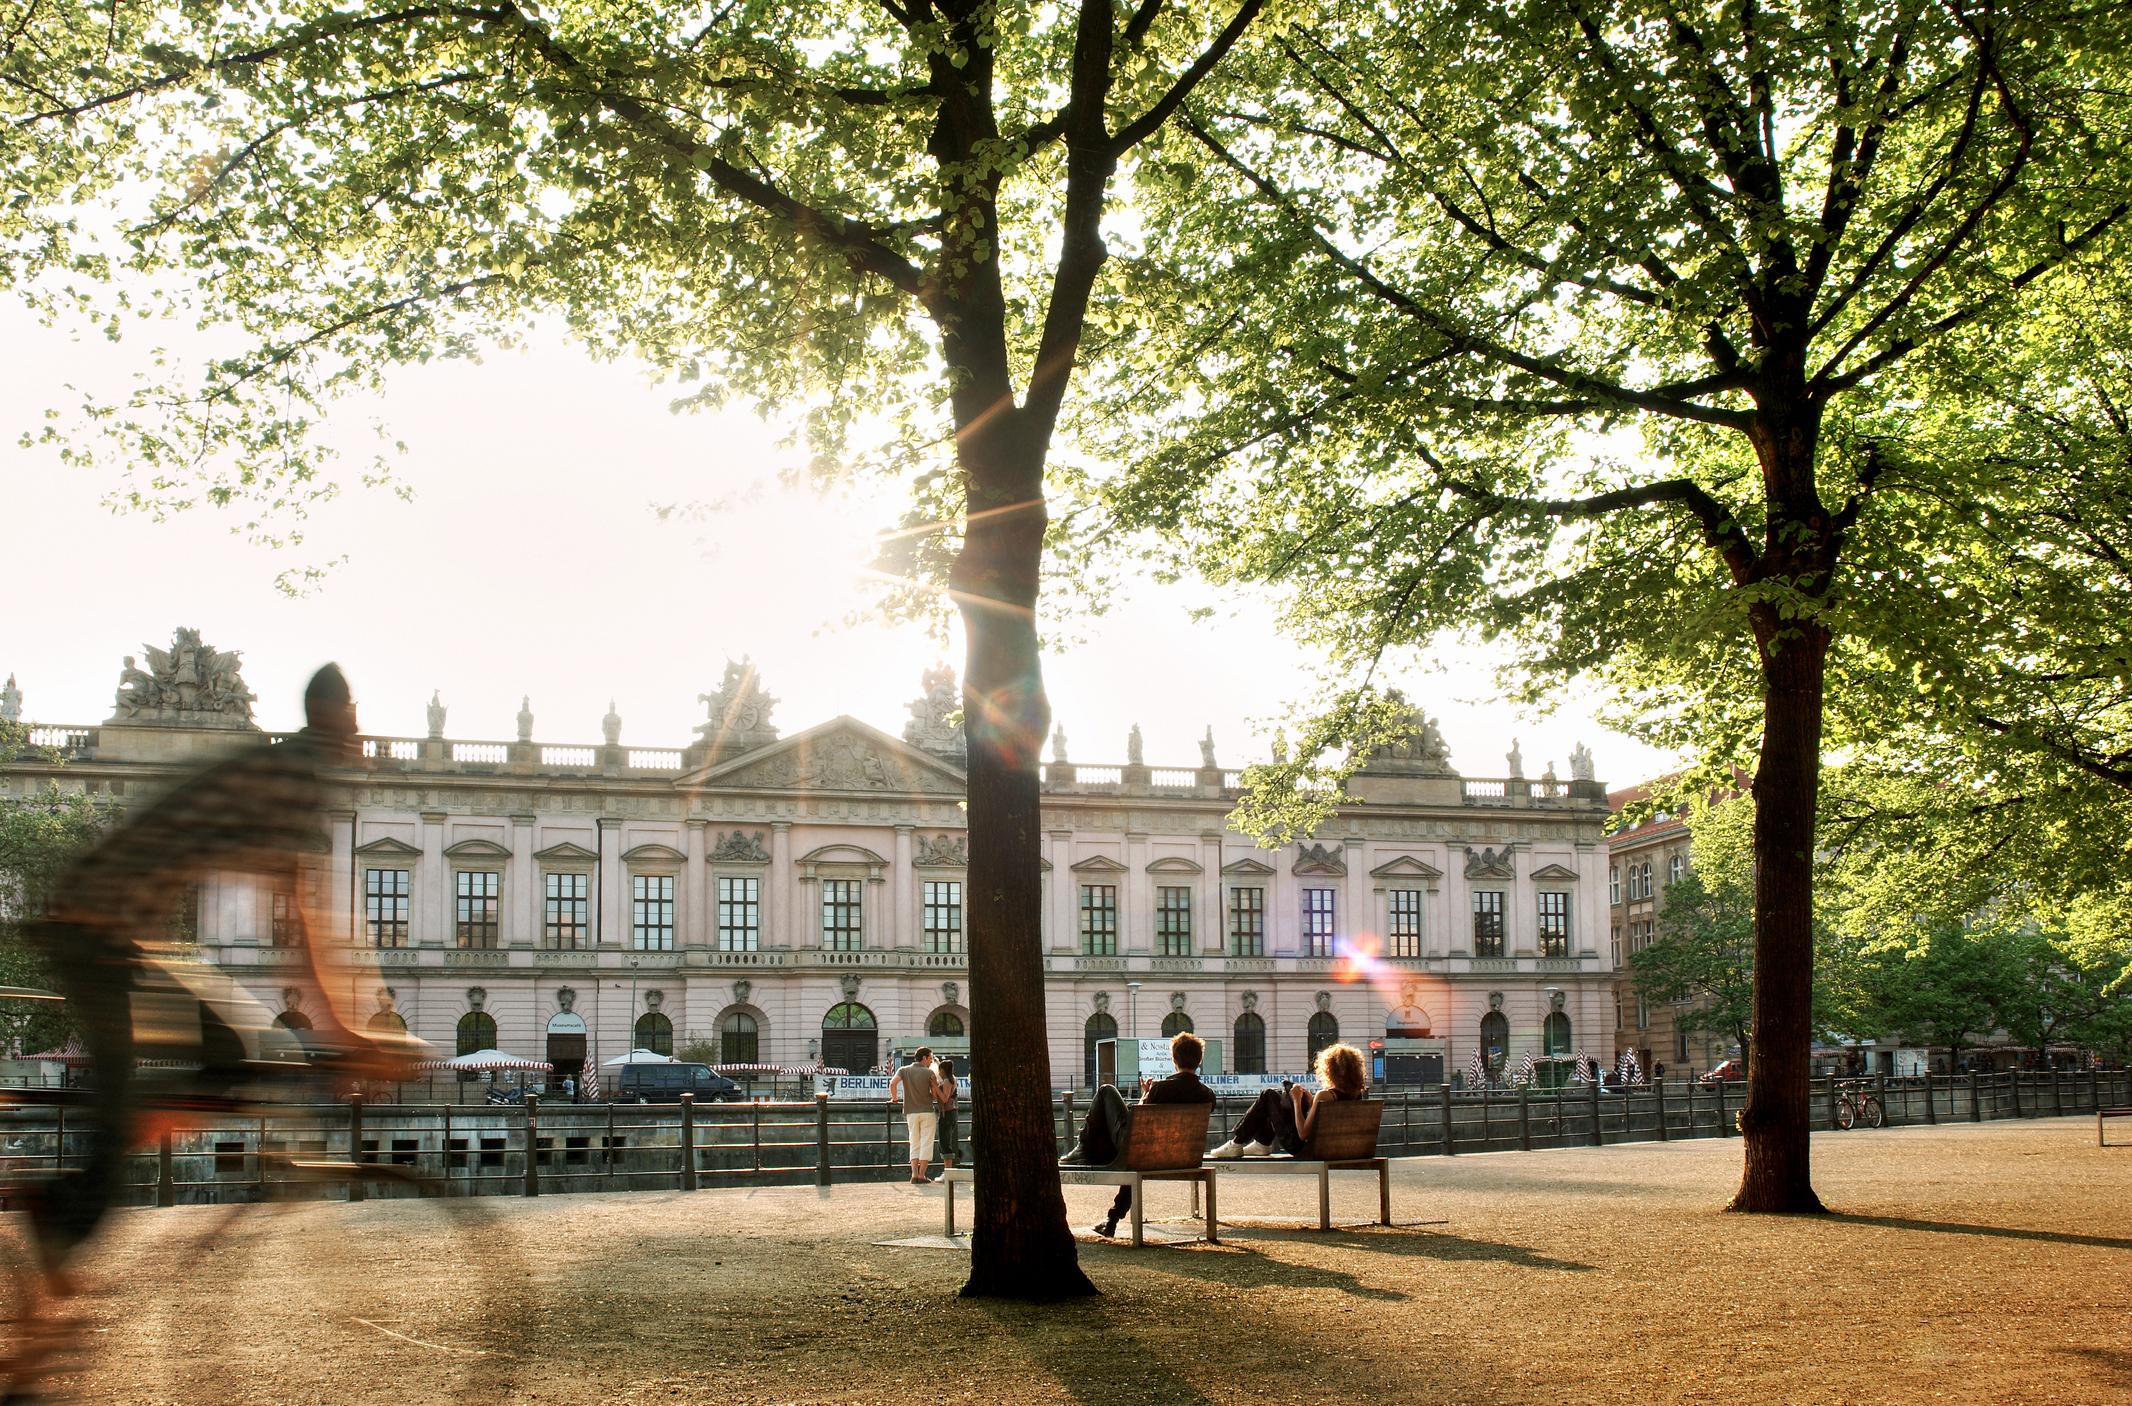 People relax by benches near trees with a classical building in the background. A blurred figure is in motion